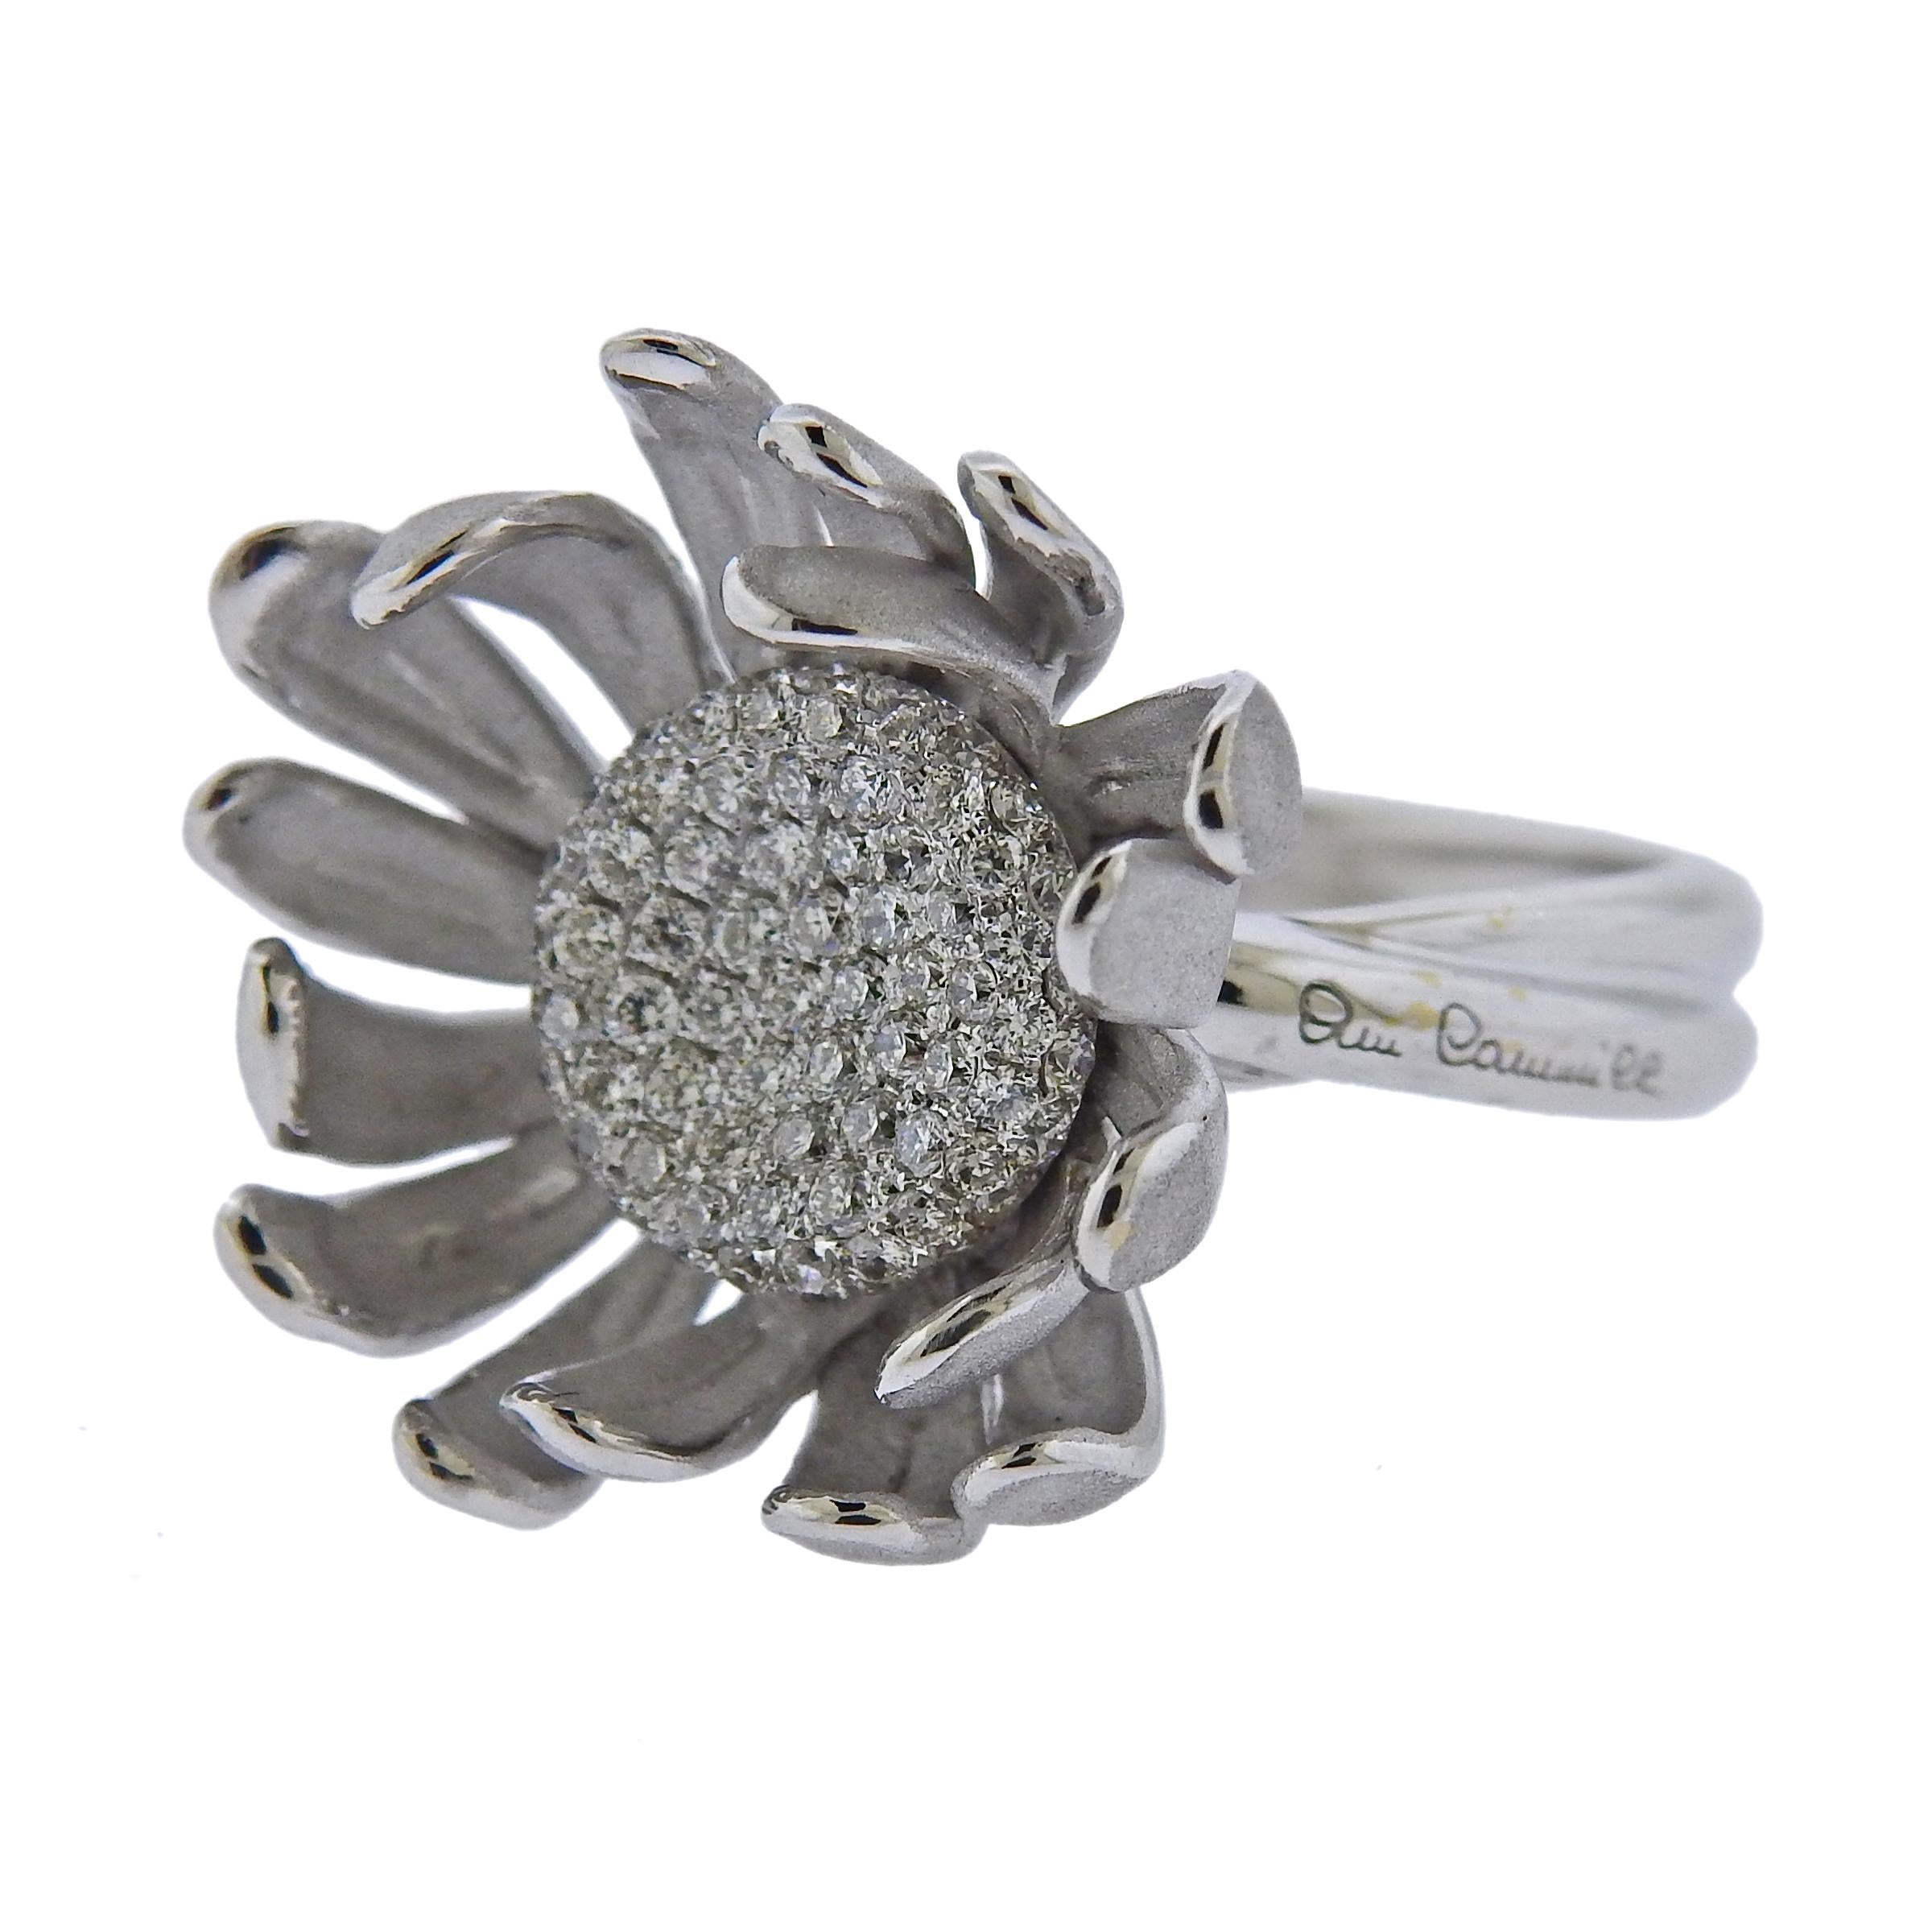 Pair of brand new 18k white gold Prelude flower ring, by Italian designer Annamria Cammilli, set with 0.59ctw in GH/VS diamonds. Comes with box and COA, retail $9410. Ring size - 7, ring top - 23mm in diameter.  Weight is 9.3 grams. Marked: 750,